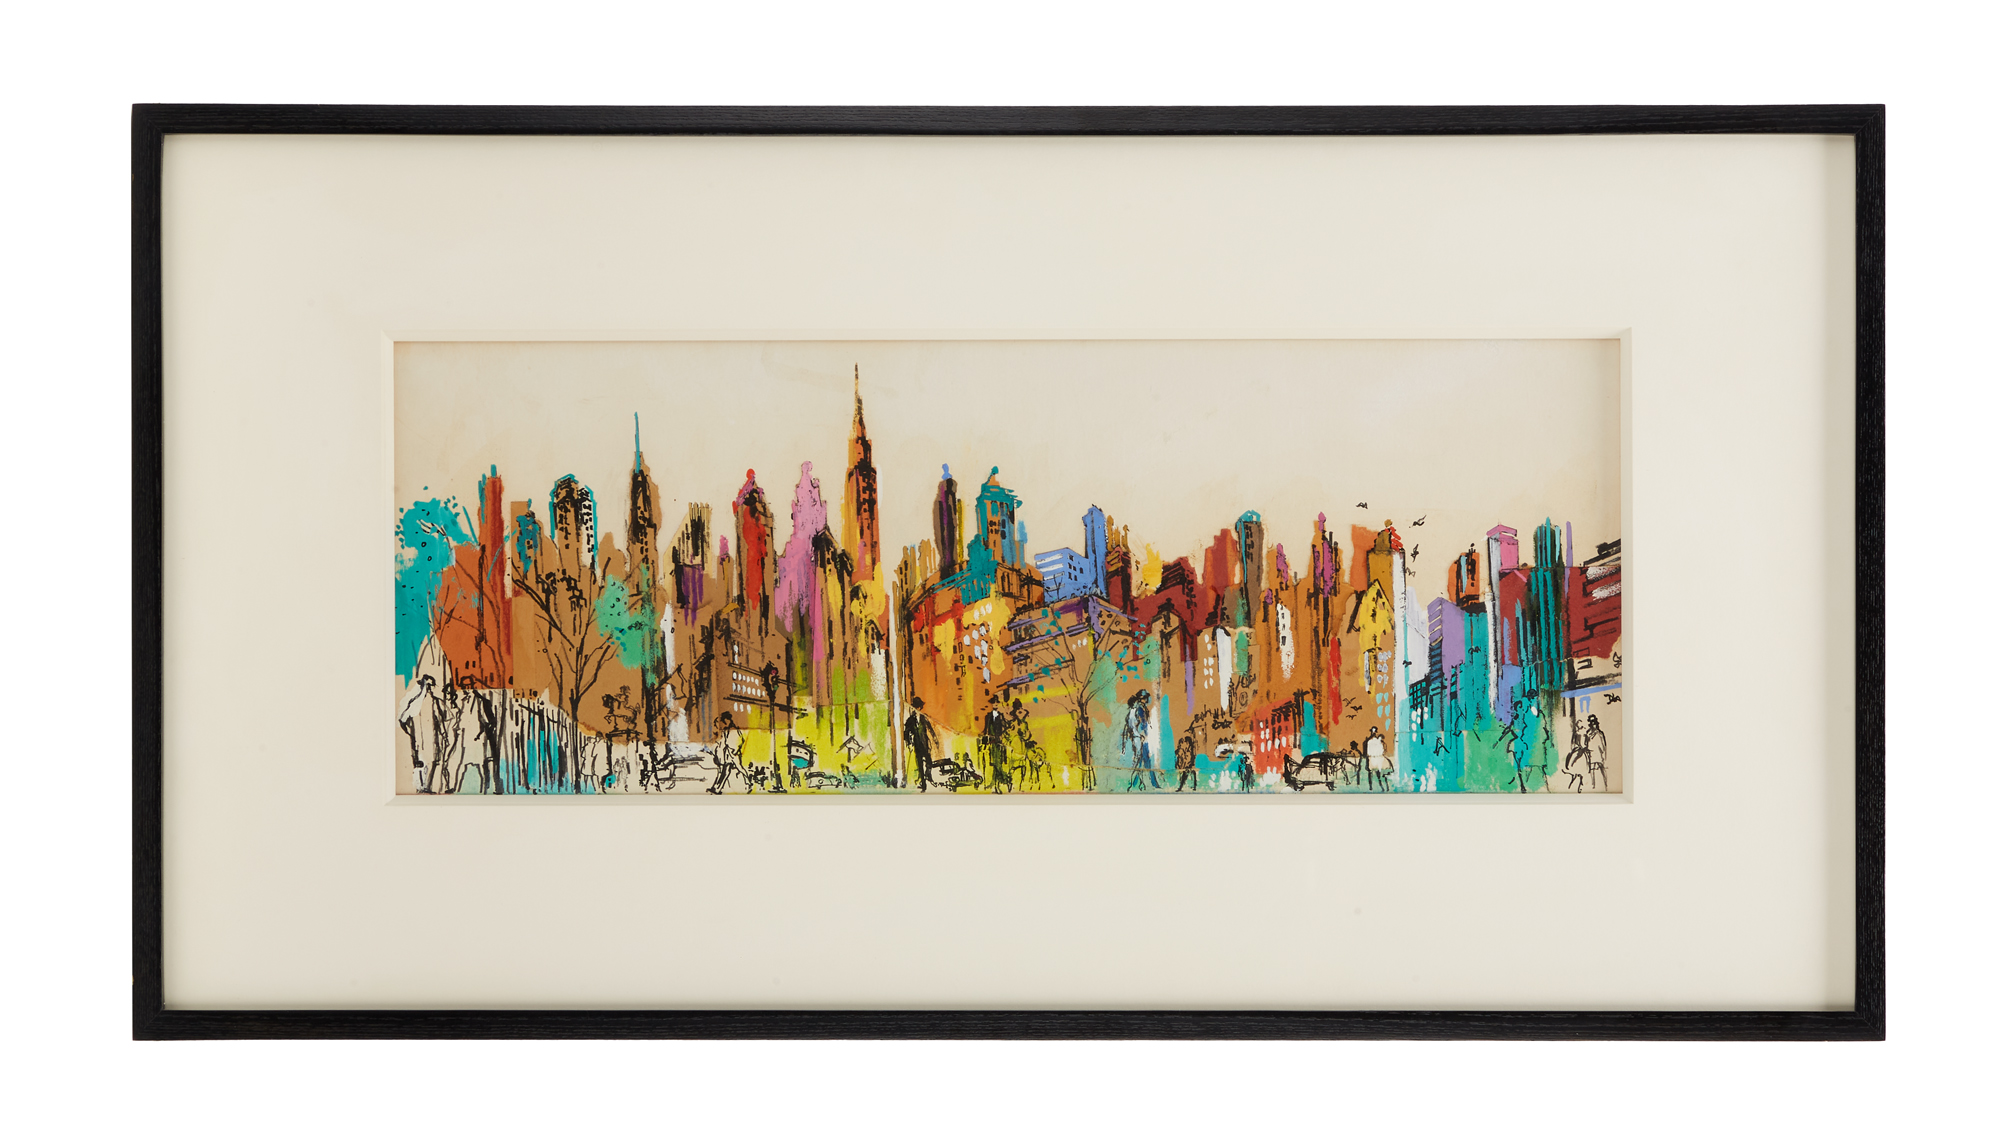 A LeRoy Neiman 1956 watercolor, ink, and collage drawing of the New York City skyline